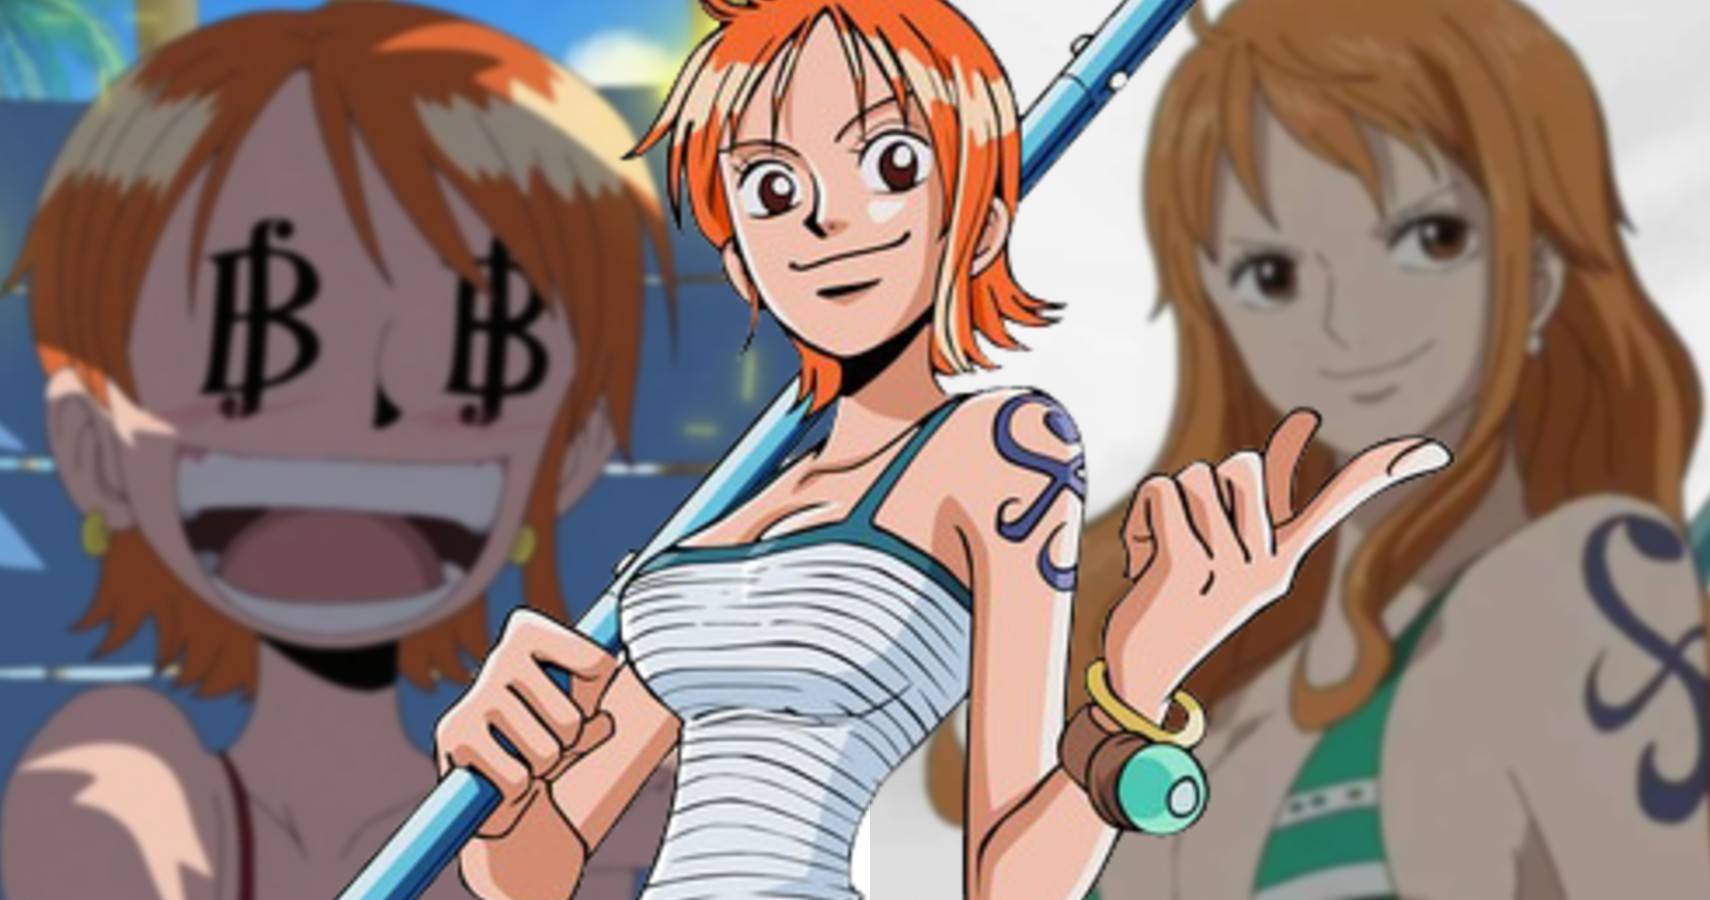 Nami can be persuasive when needed gintsu full video